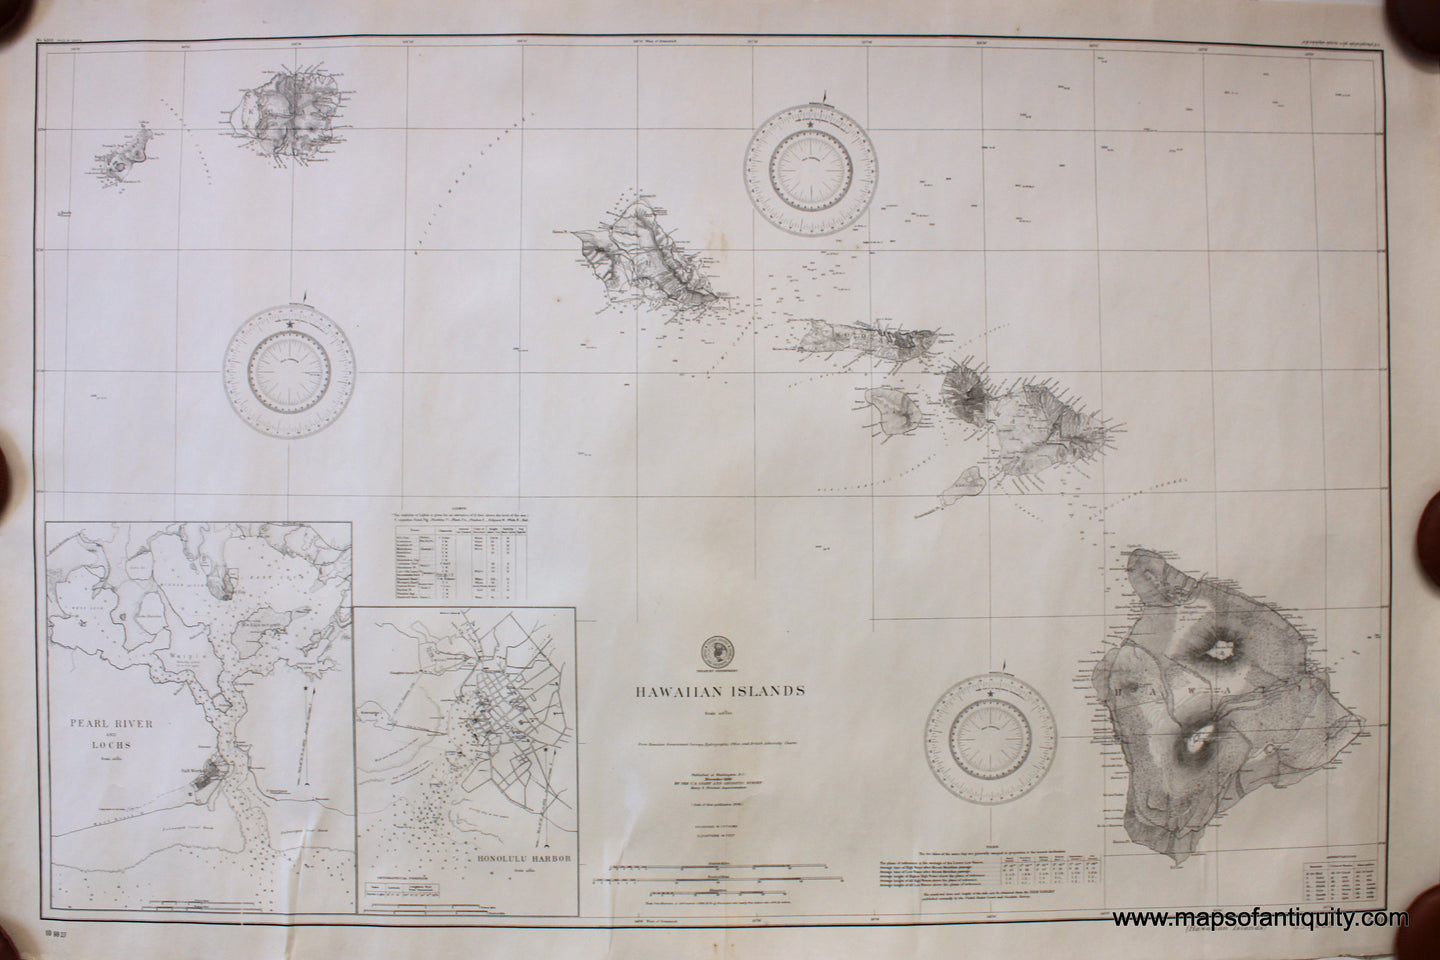 Antique-Black-and-White-Nautical-Chart-Hawaiian-Islands-**********-United-States-Hawaii-1899-USC&GS-Maps-Of-Antiquity